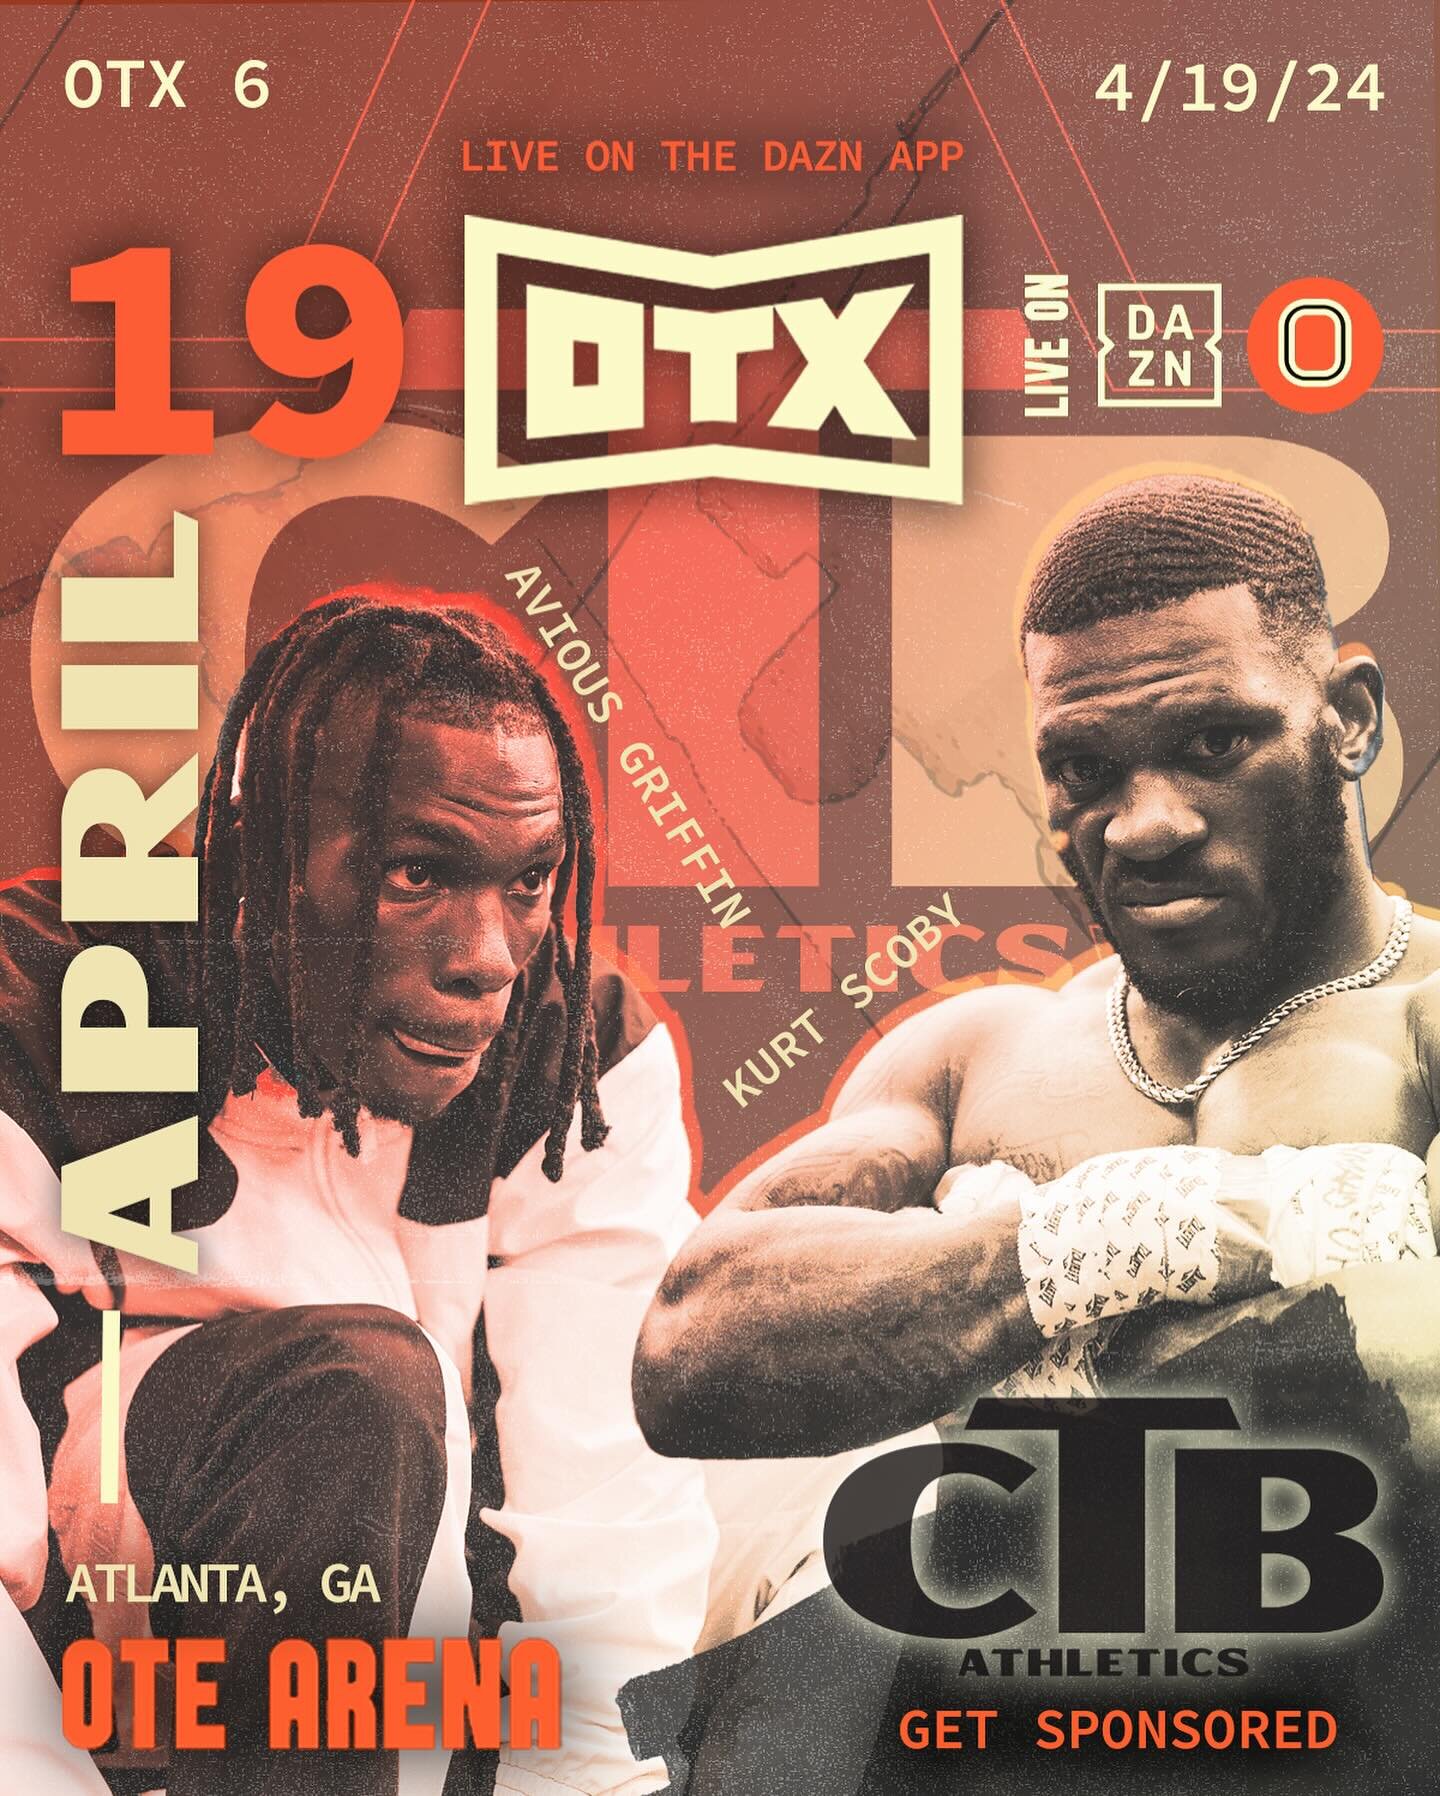 Live on @daznboxing this April 19th both CTB fighters @aviousgriffin &amp; @channel2scoob will be returning to the ring on the same card with @overtimeboxing at the OTE Arena in Atlanta Georgia. They&rsquo;re both looking to go 14-0‼️ Ticket link dro